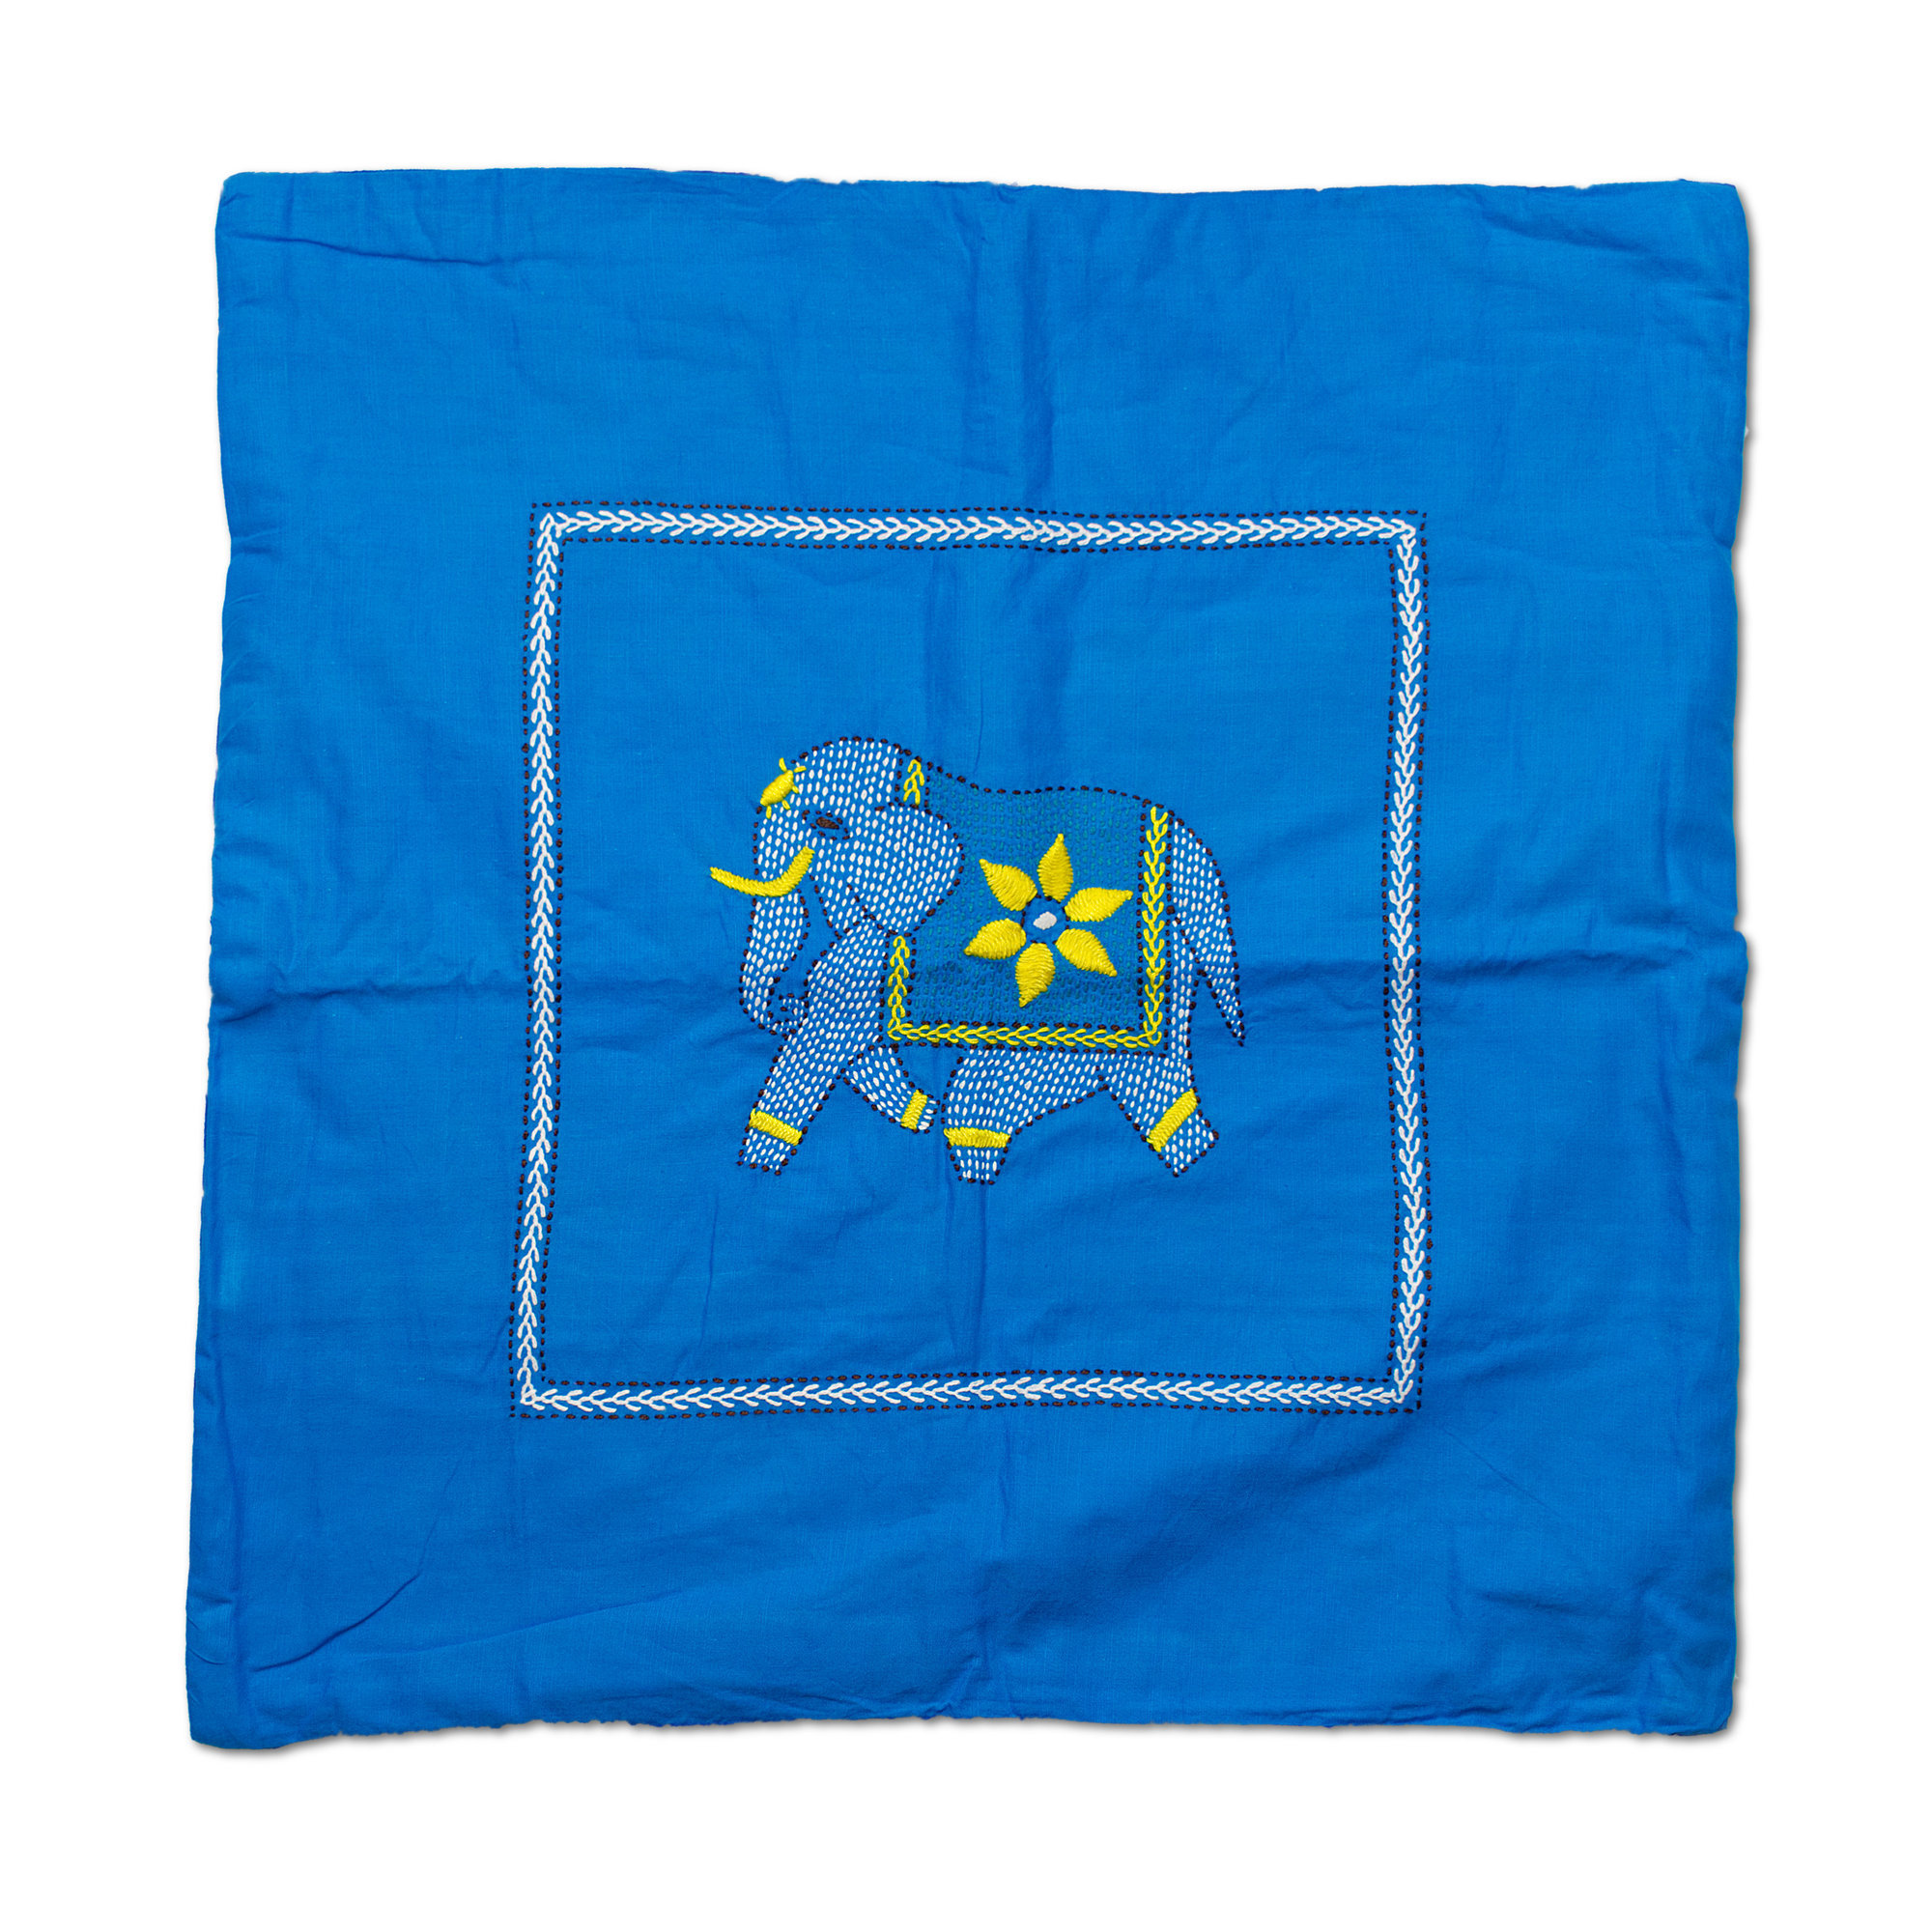 Cushion Cover - Dinajpur (elephant) In Siam (turquoise)